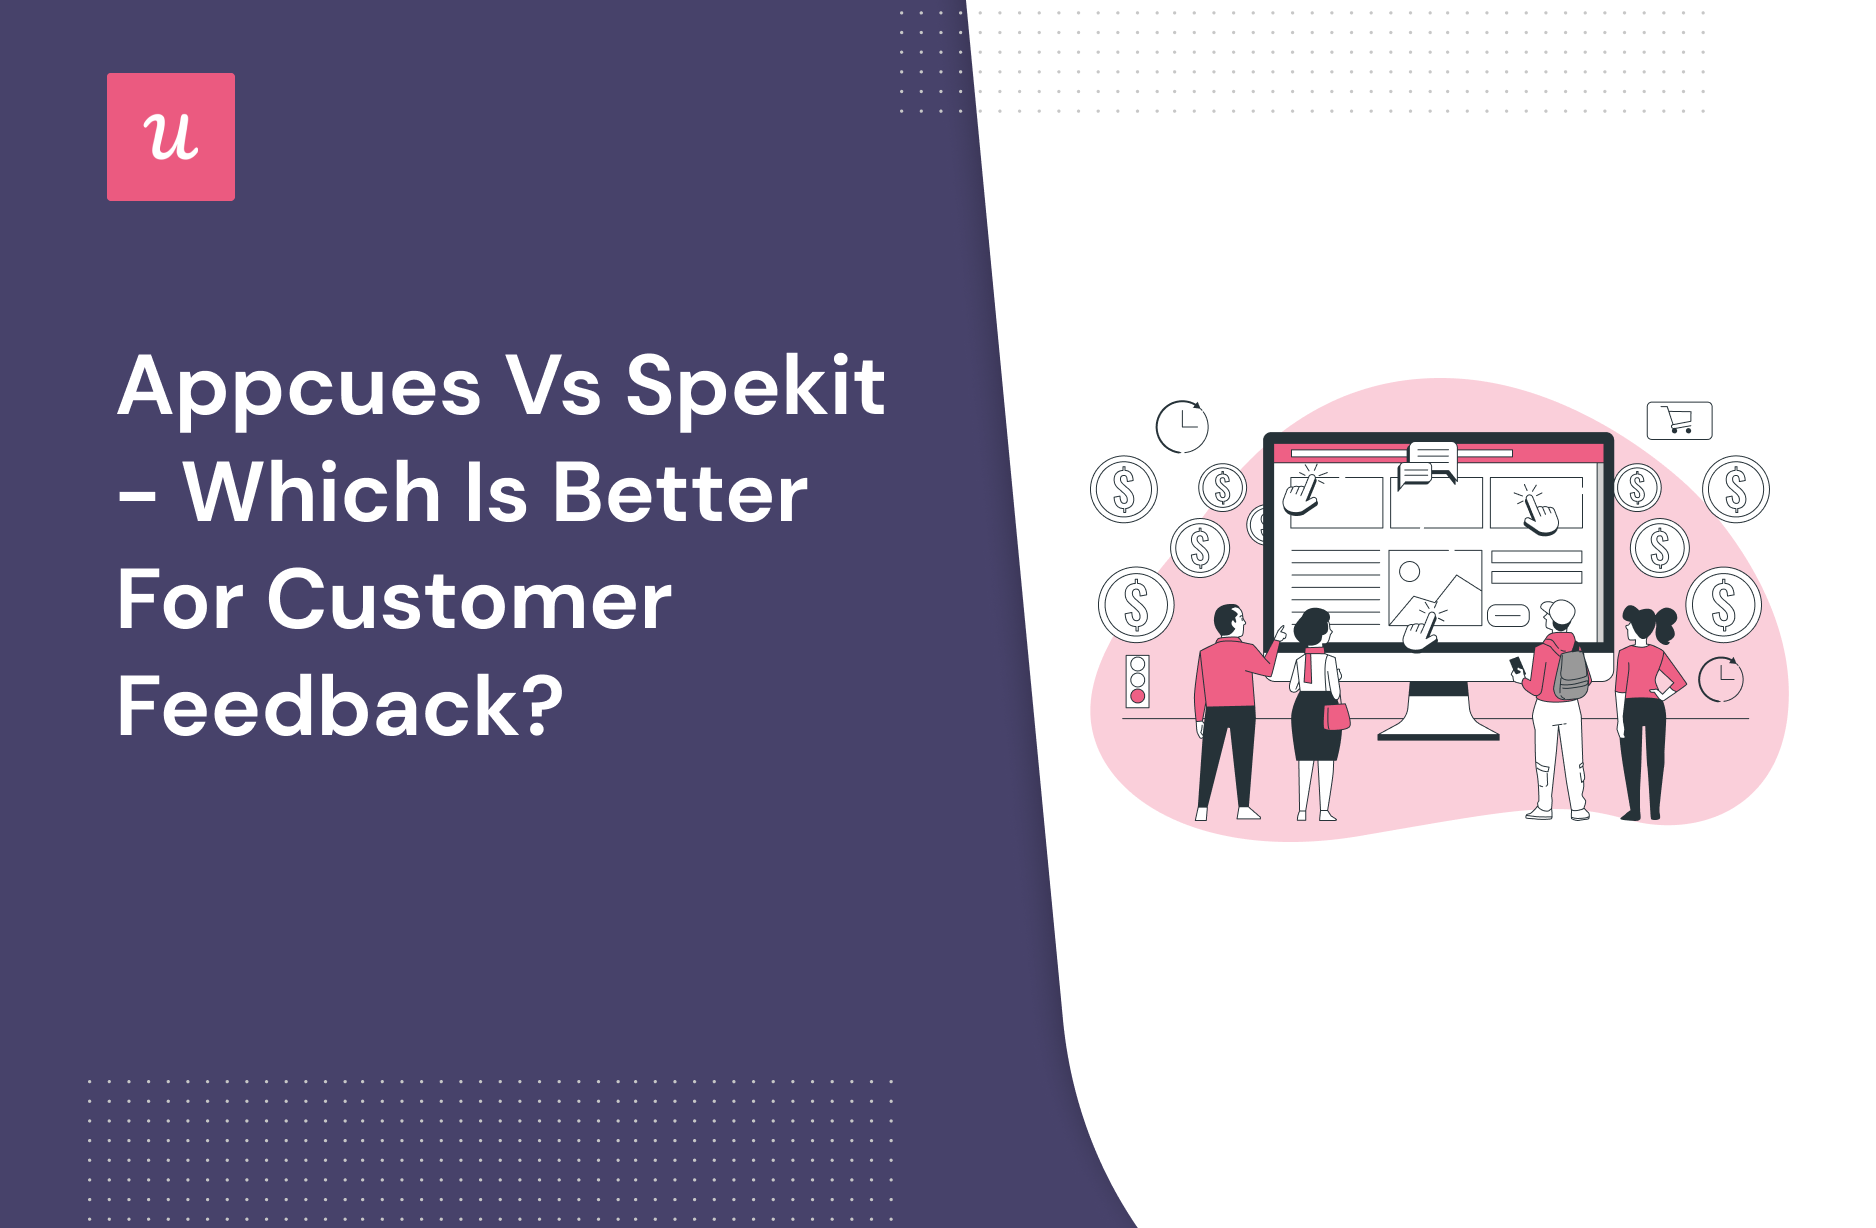 Appcues vs Spekit - which is better for customer feedback